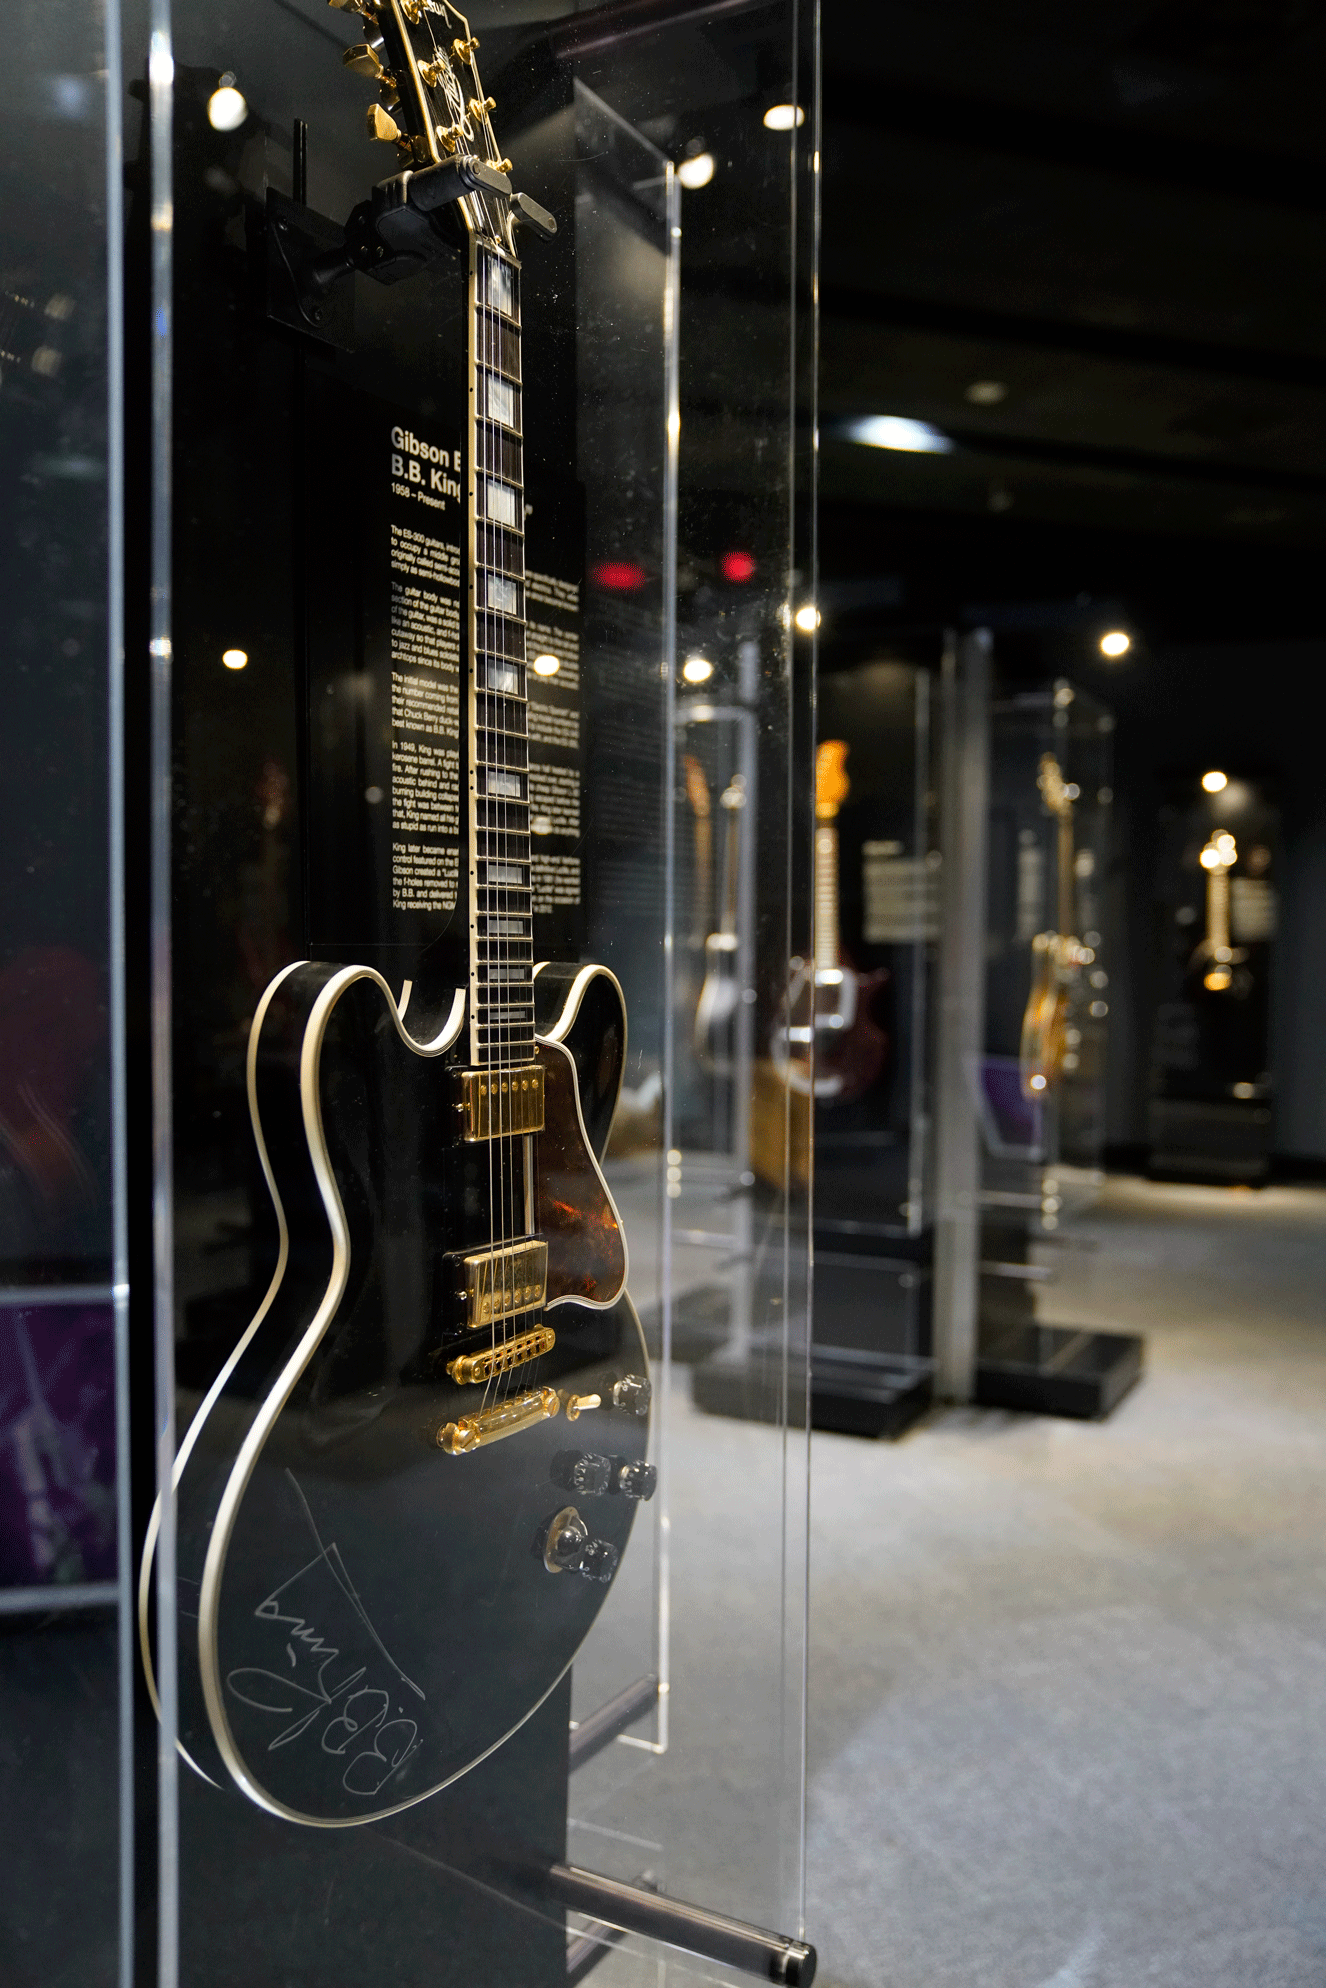 A Gibson ES-355 signed by B.B. King. King, who named his guitars "Lucille," received the National GUITAR Museum Lifetime Achievement Award in 2012.